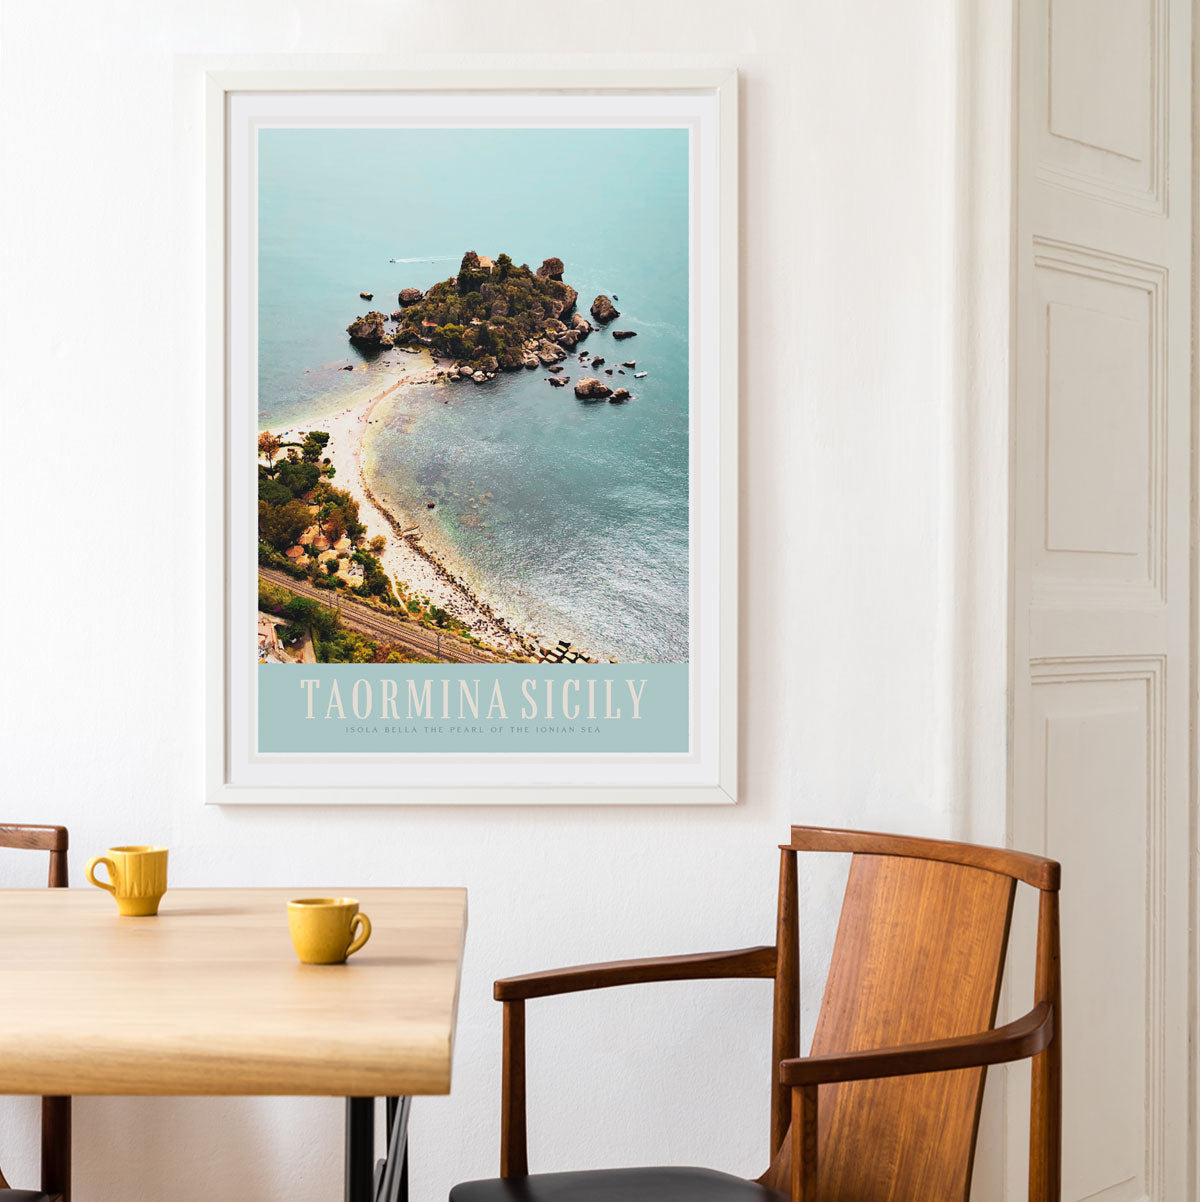 Taormina Sicily vintage retro travel style poster print by places we luv